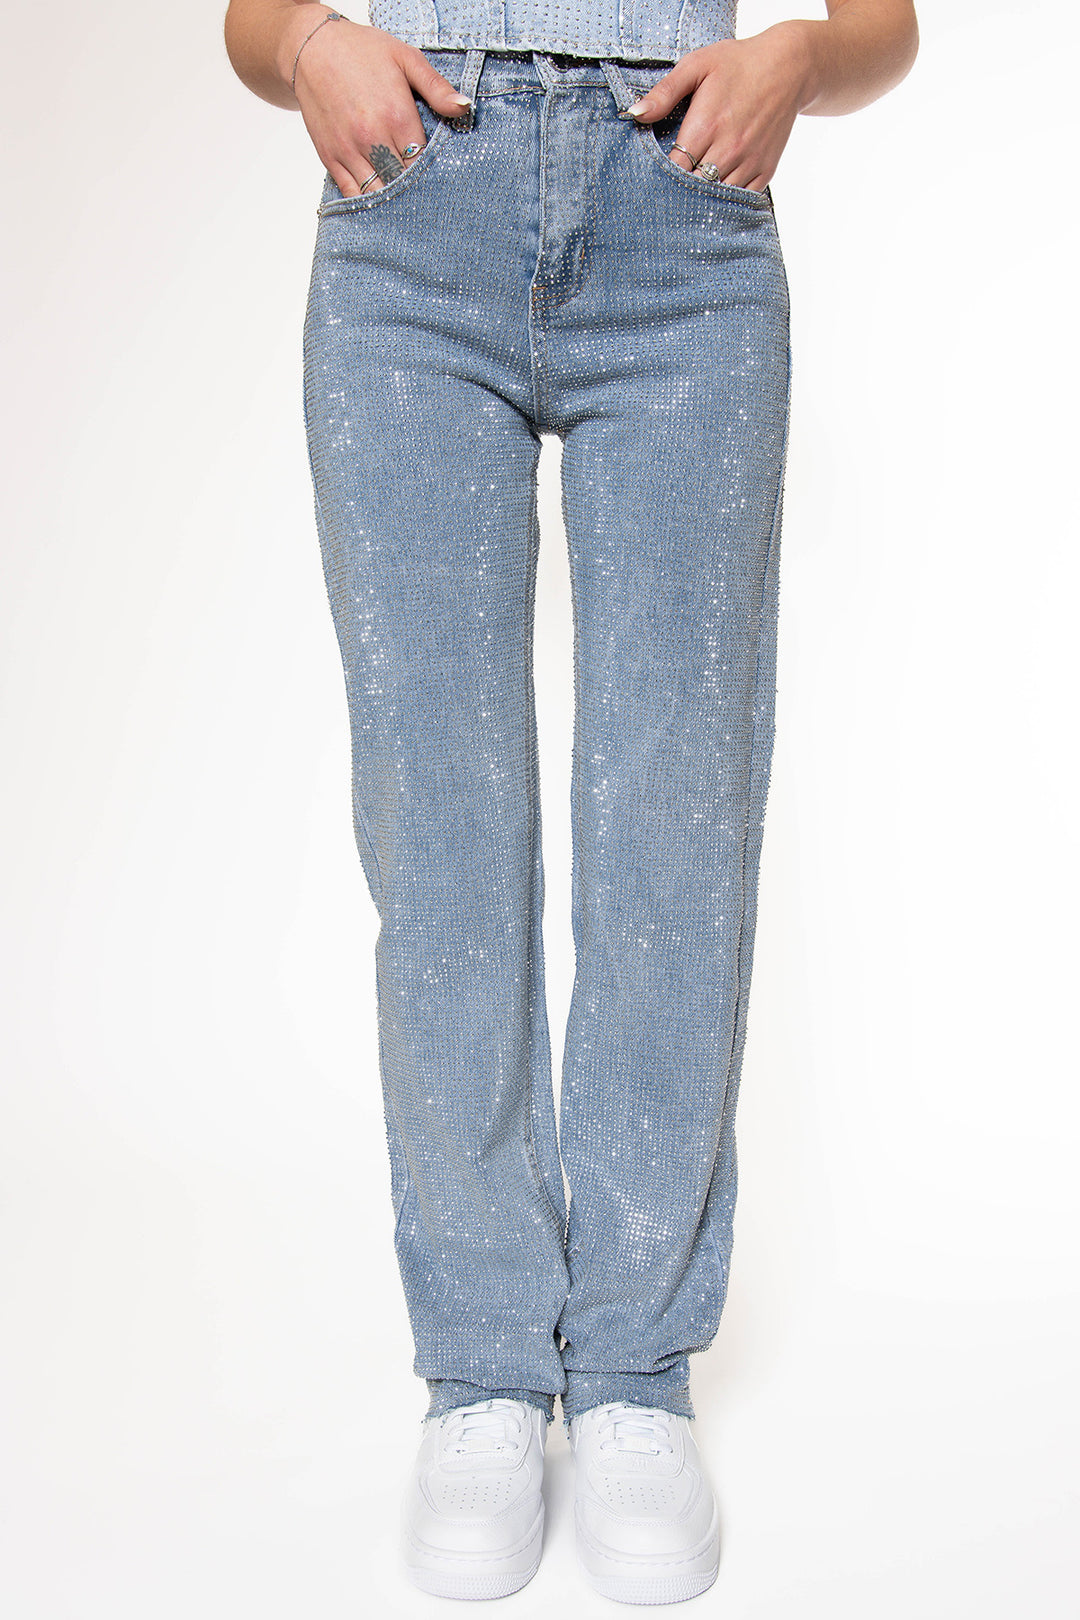 Kyra Stretch Diamonds All Over Straight Jeans - Washed Blue Jeans Routines Fashion   